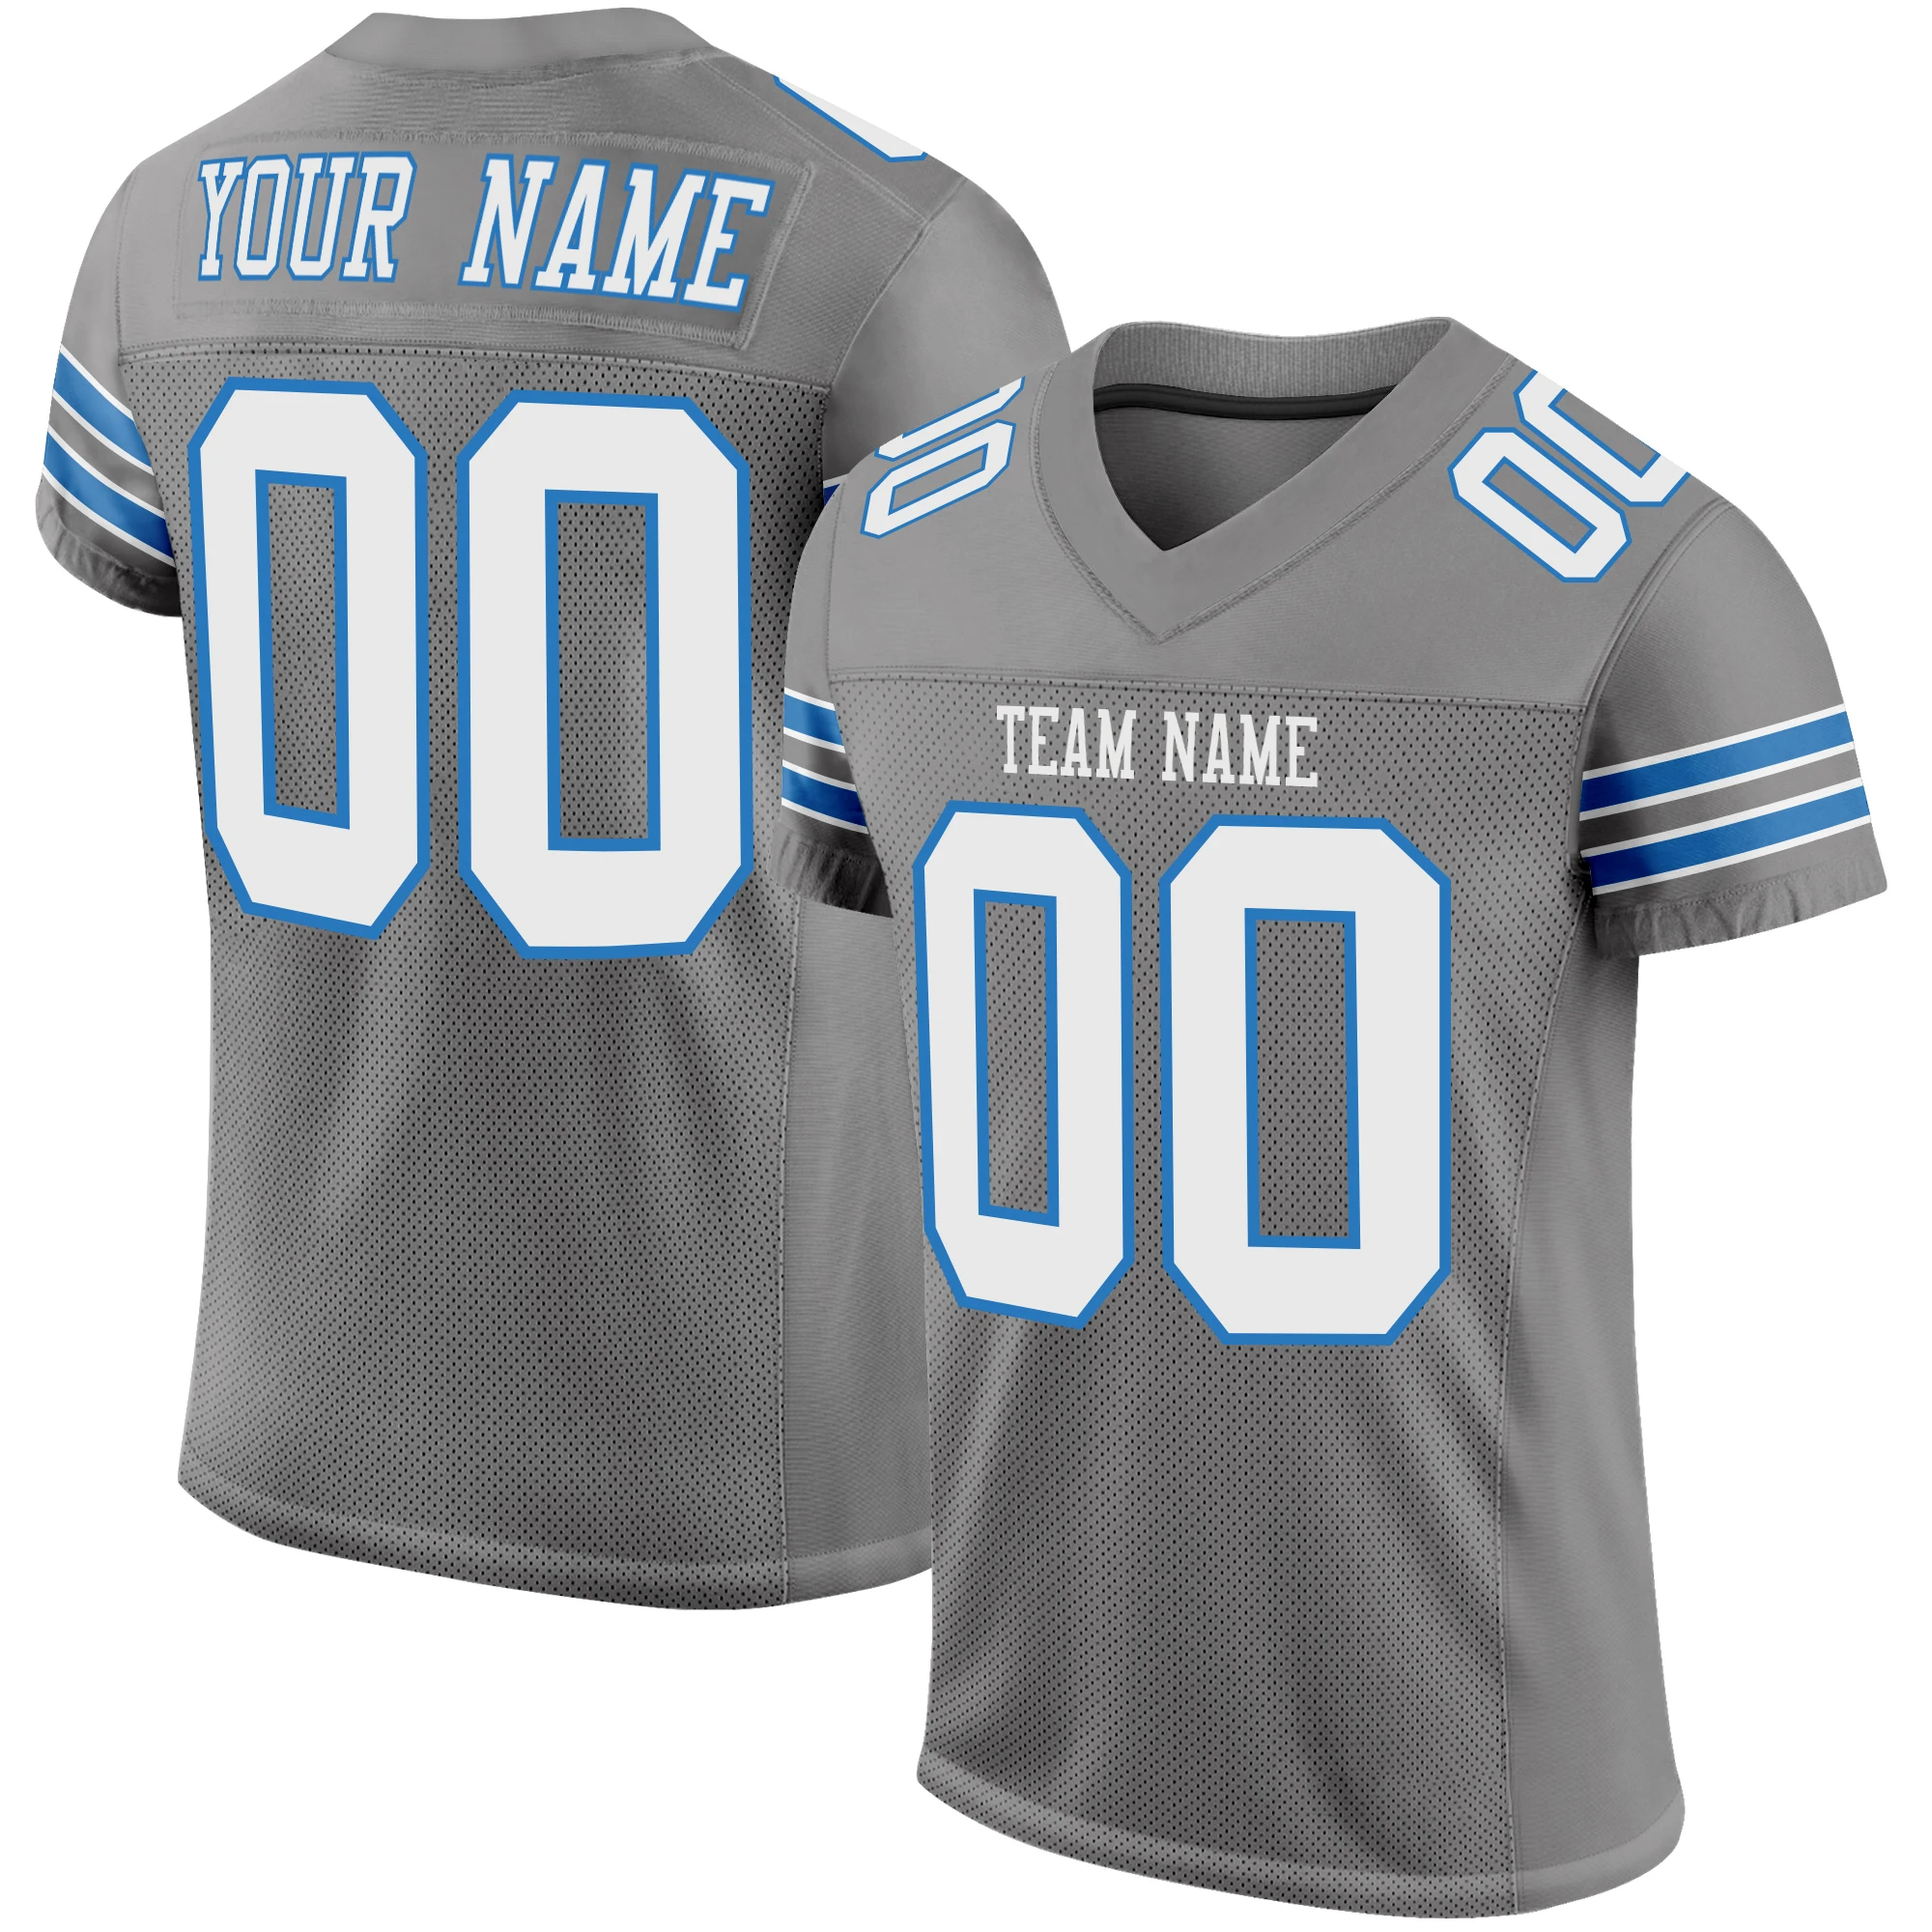 

Customized Football Jerseys Half-Button Shirts Personalized Printed Letters Trey Lance Digital Rugby Training Uniforms Men/Youth